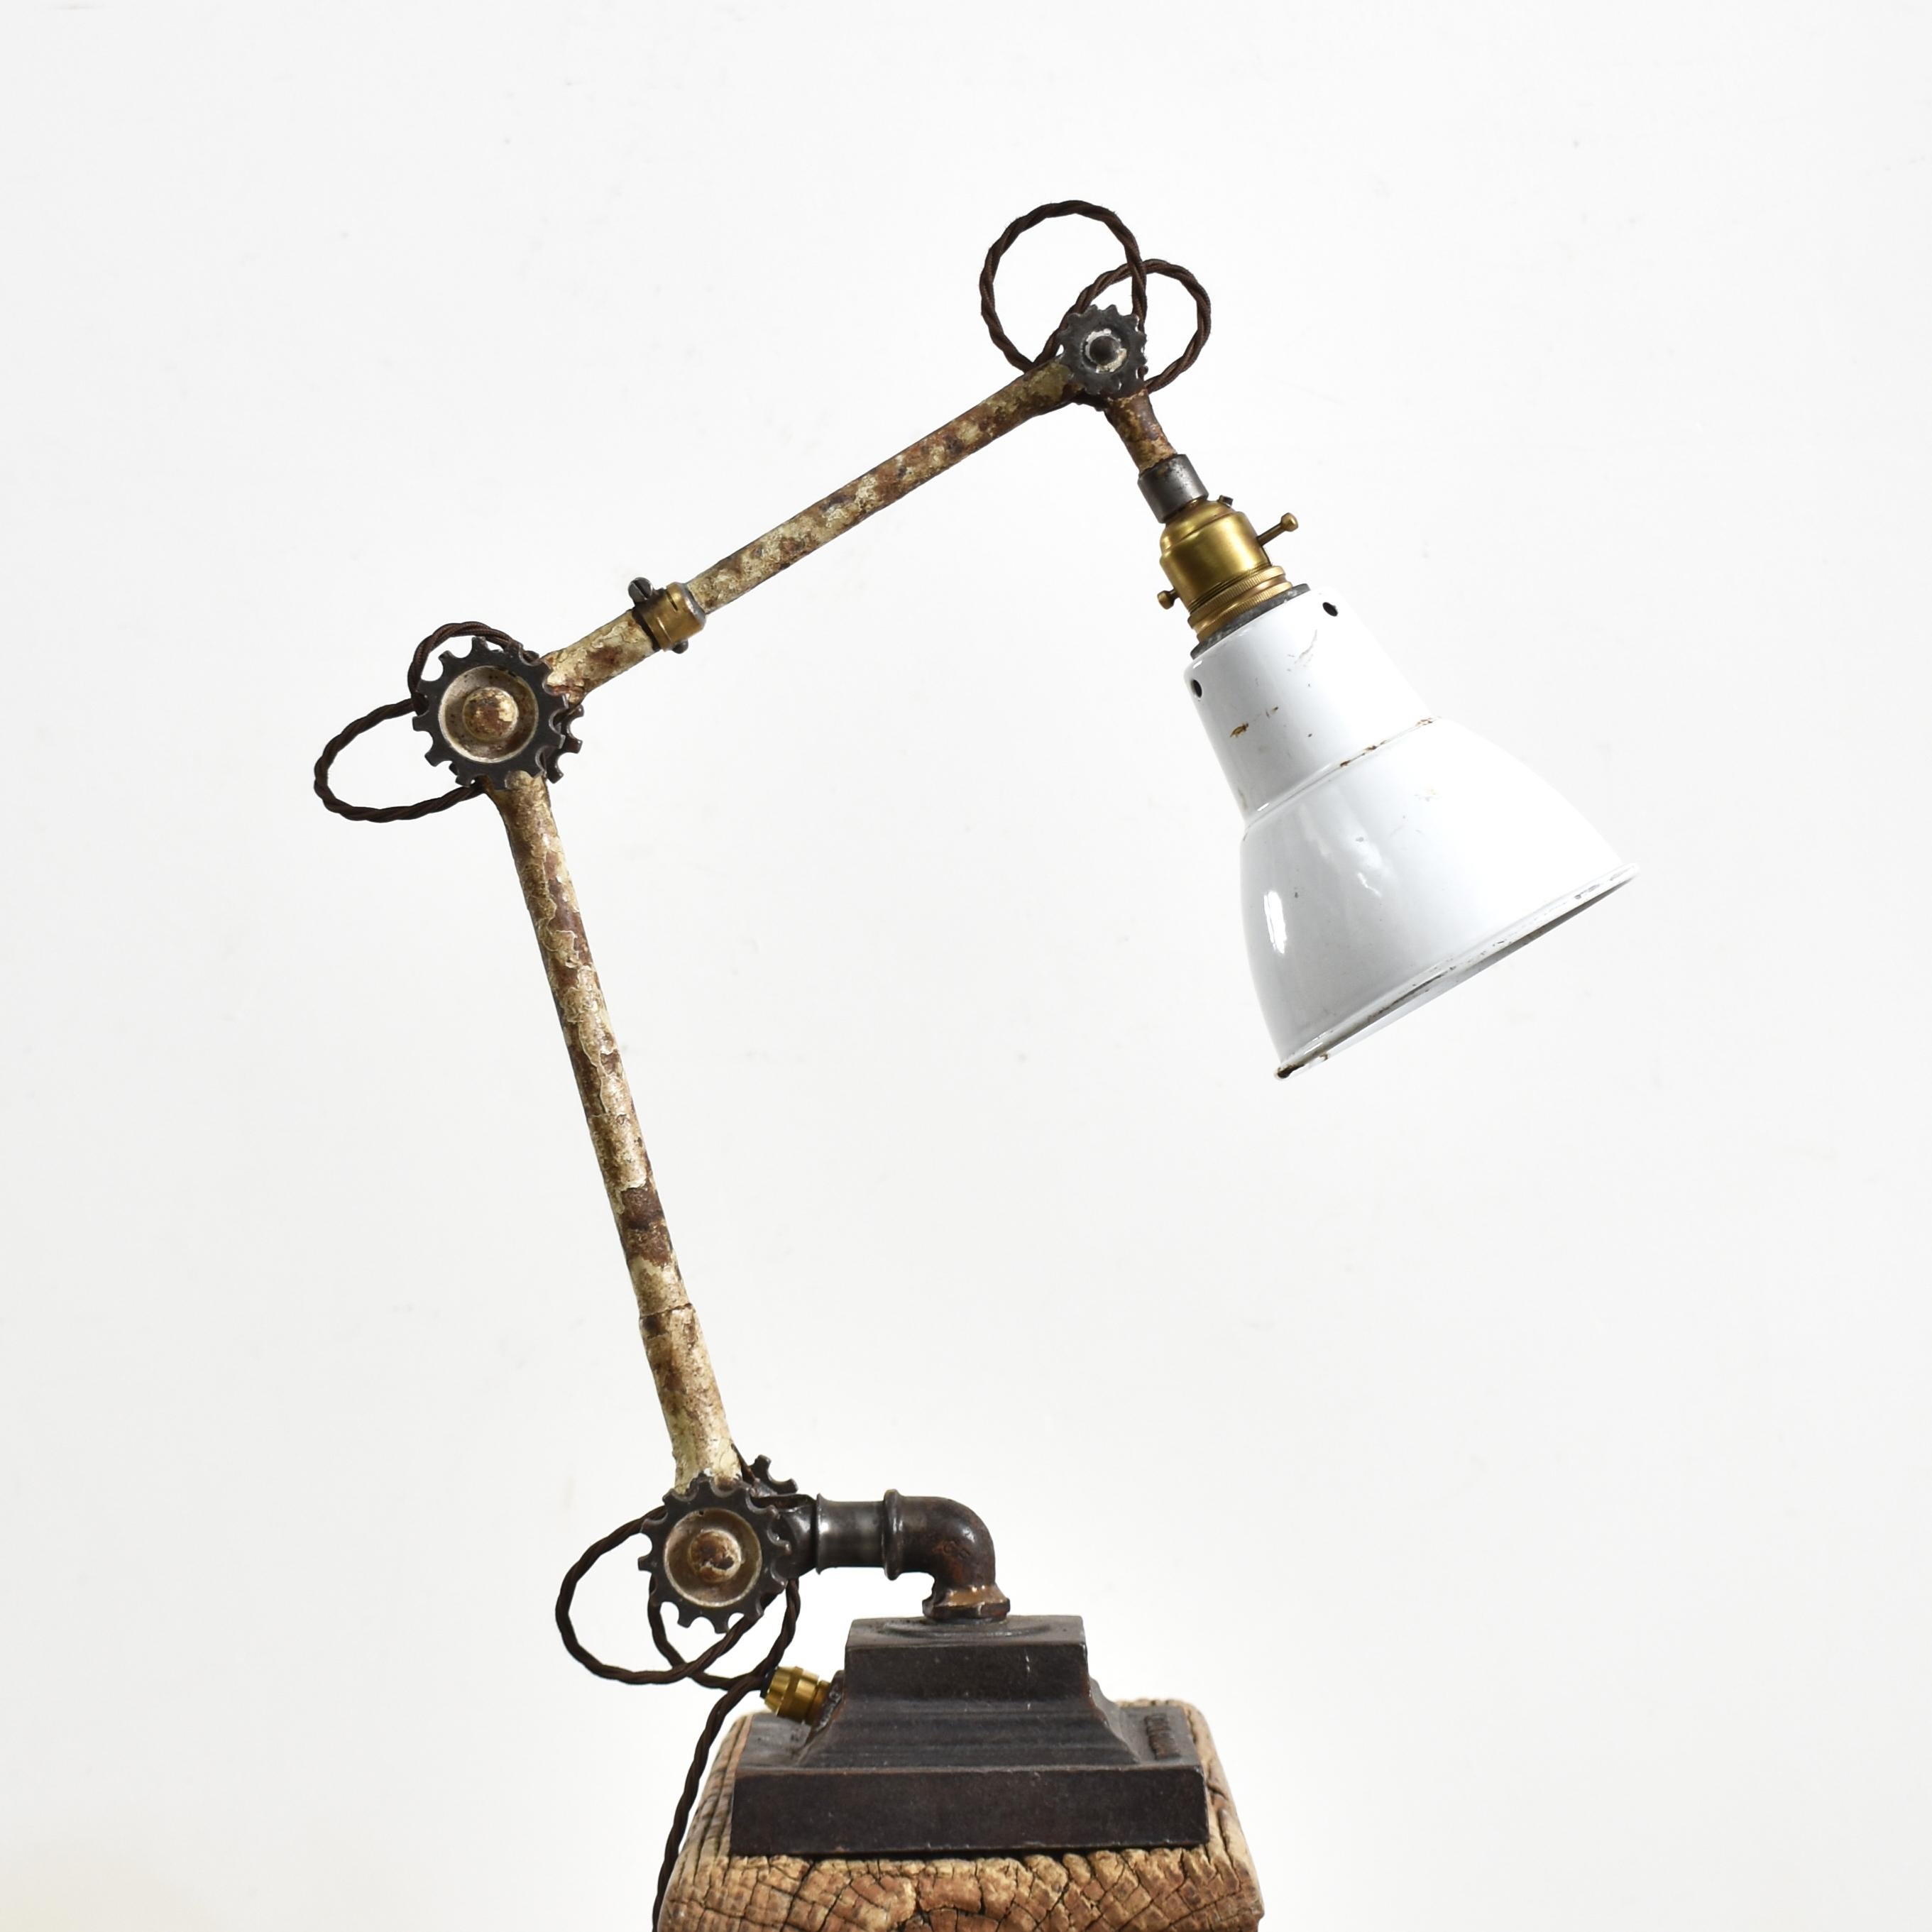 Industrial Dugdills Desk Lamp

A scarce early Dugdills lamp reclaimed from a military installation. The lamp is in original condition retaining its white enamel shade and steel arms with their original cream paint. This is a rare model of Dugdills